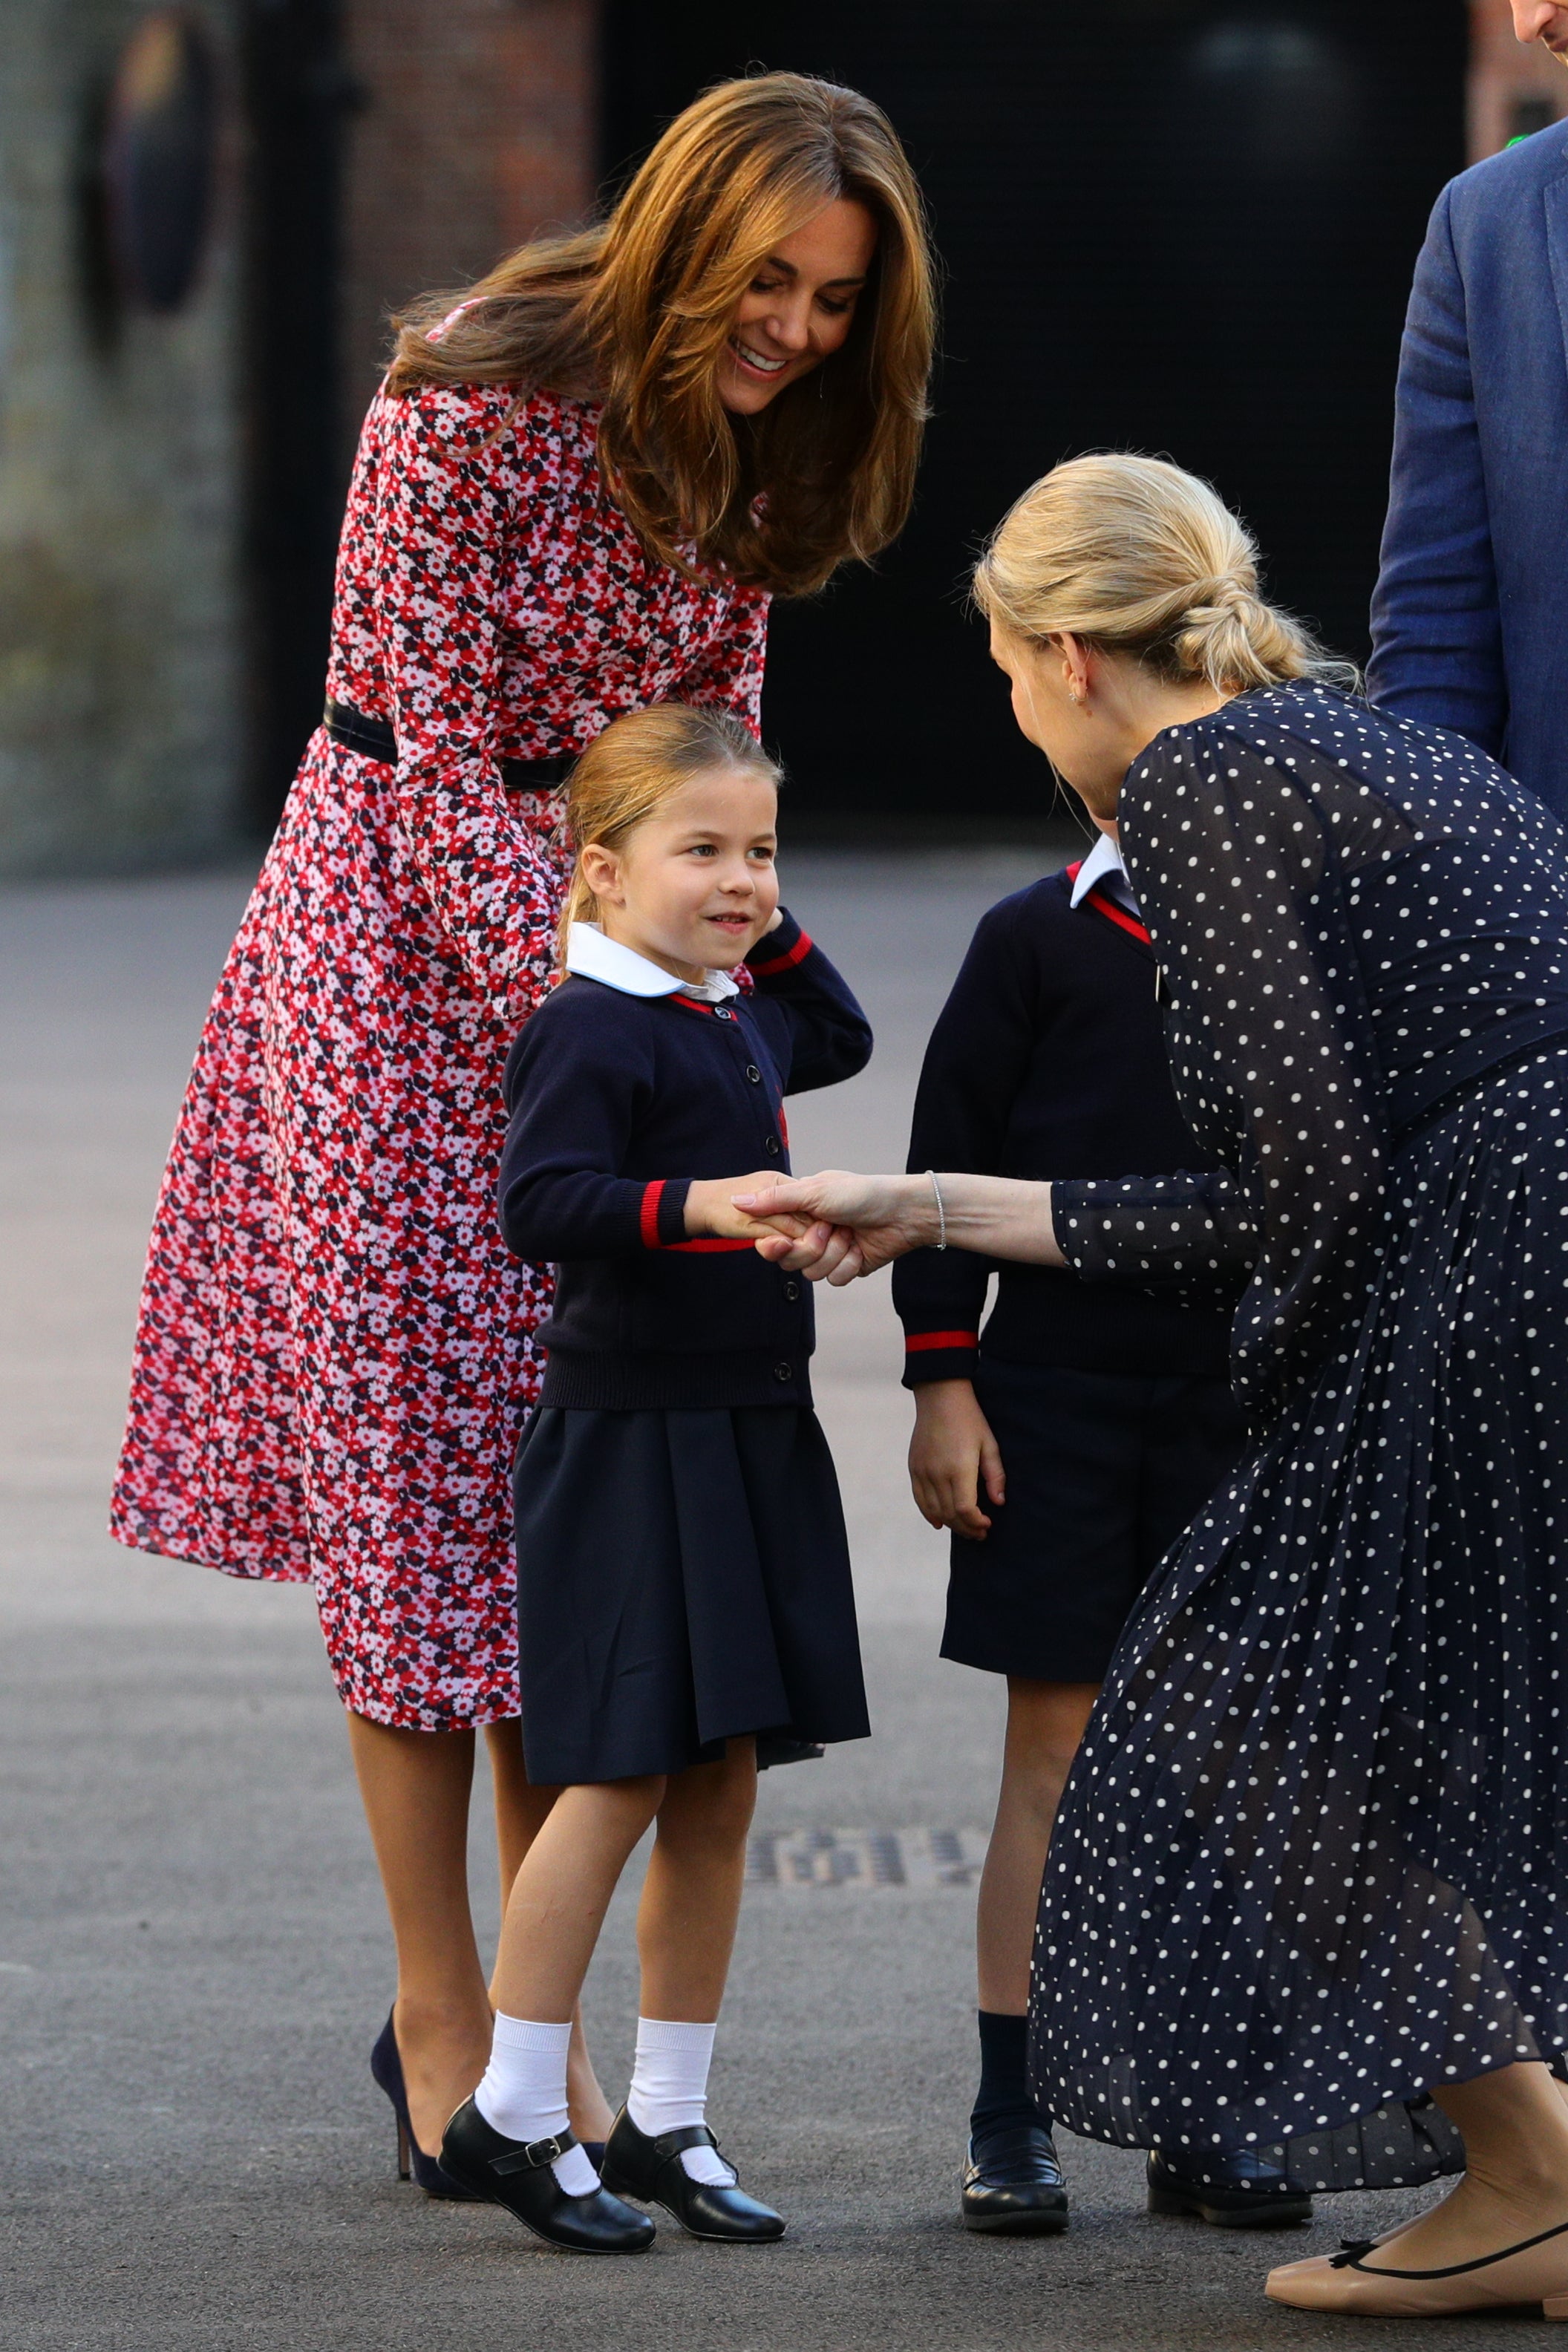 Helen Haslem, head of the lower school at Thomas’s Battersea, greets Princess Charlotte on her first day (Aaron Chown/PA)